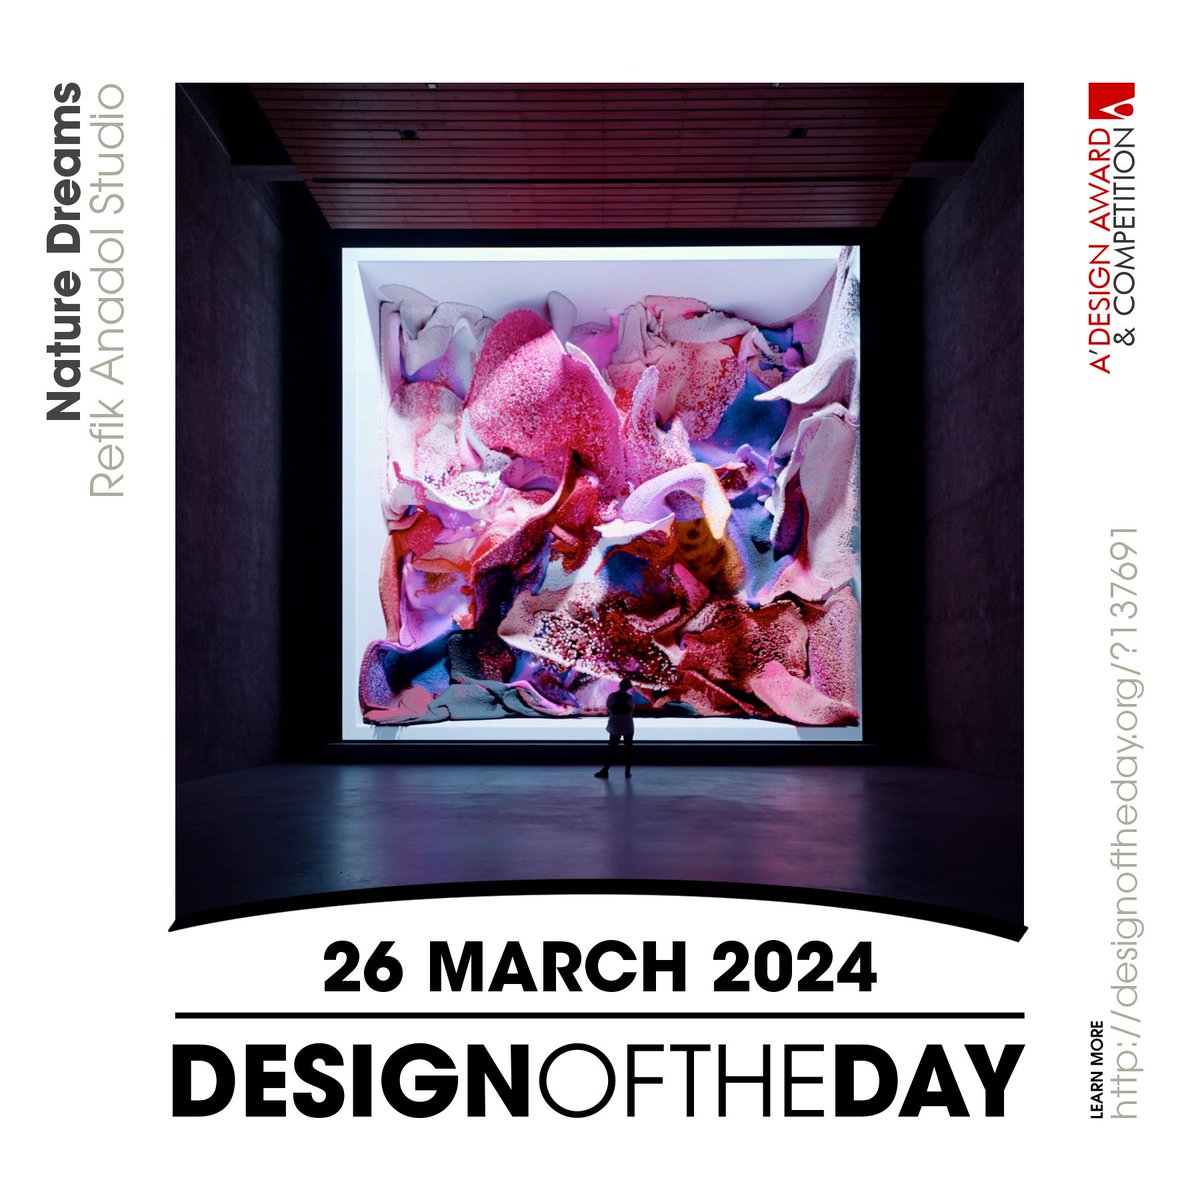 Congrats to Refik Anadol Studio, the creator behind the Design of the Day of 26 March 2024 - Nature Dreams Digital Art Exhibition. Check out this great work now. We are currently featuring it at designoftheday.org/?137691 #adesignaward #adesigncompetition #designoftheday…